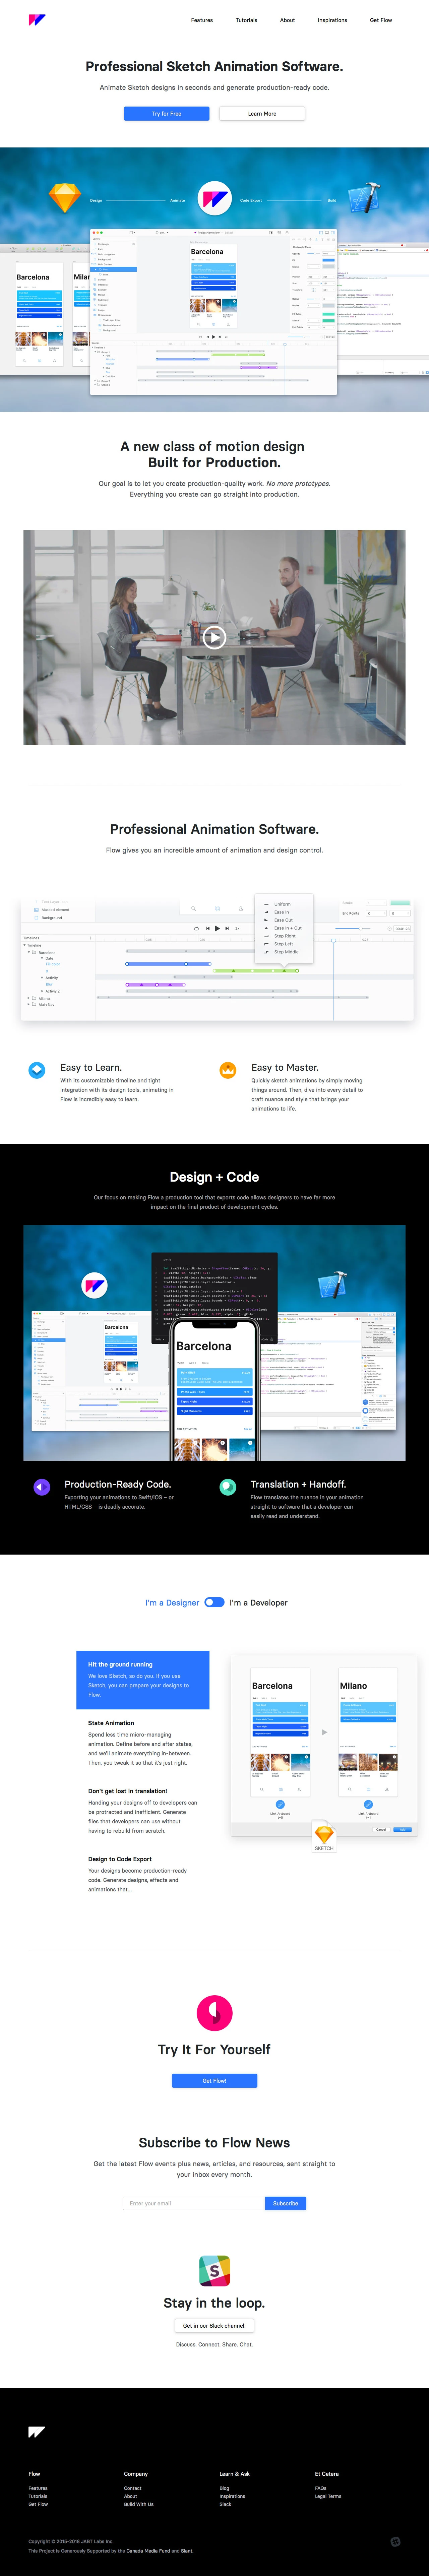 Flow Landing Page Example: Go beyond prototyping - Flow lets you animate designs and export development ready code